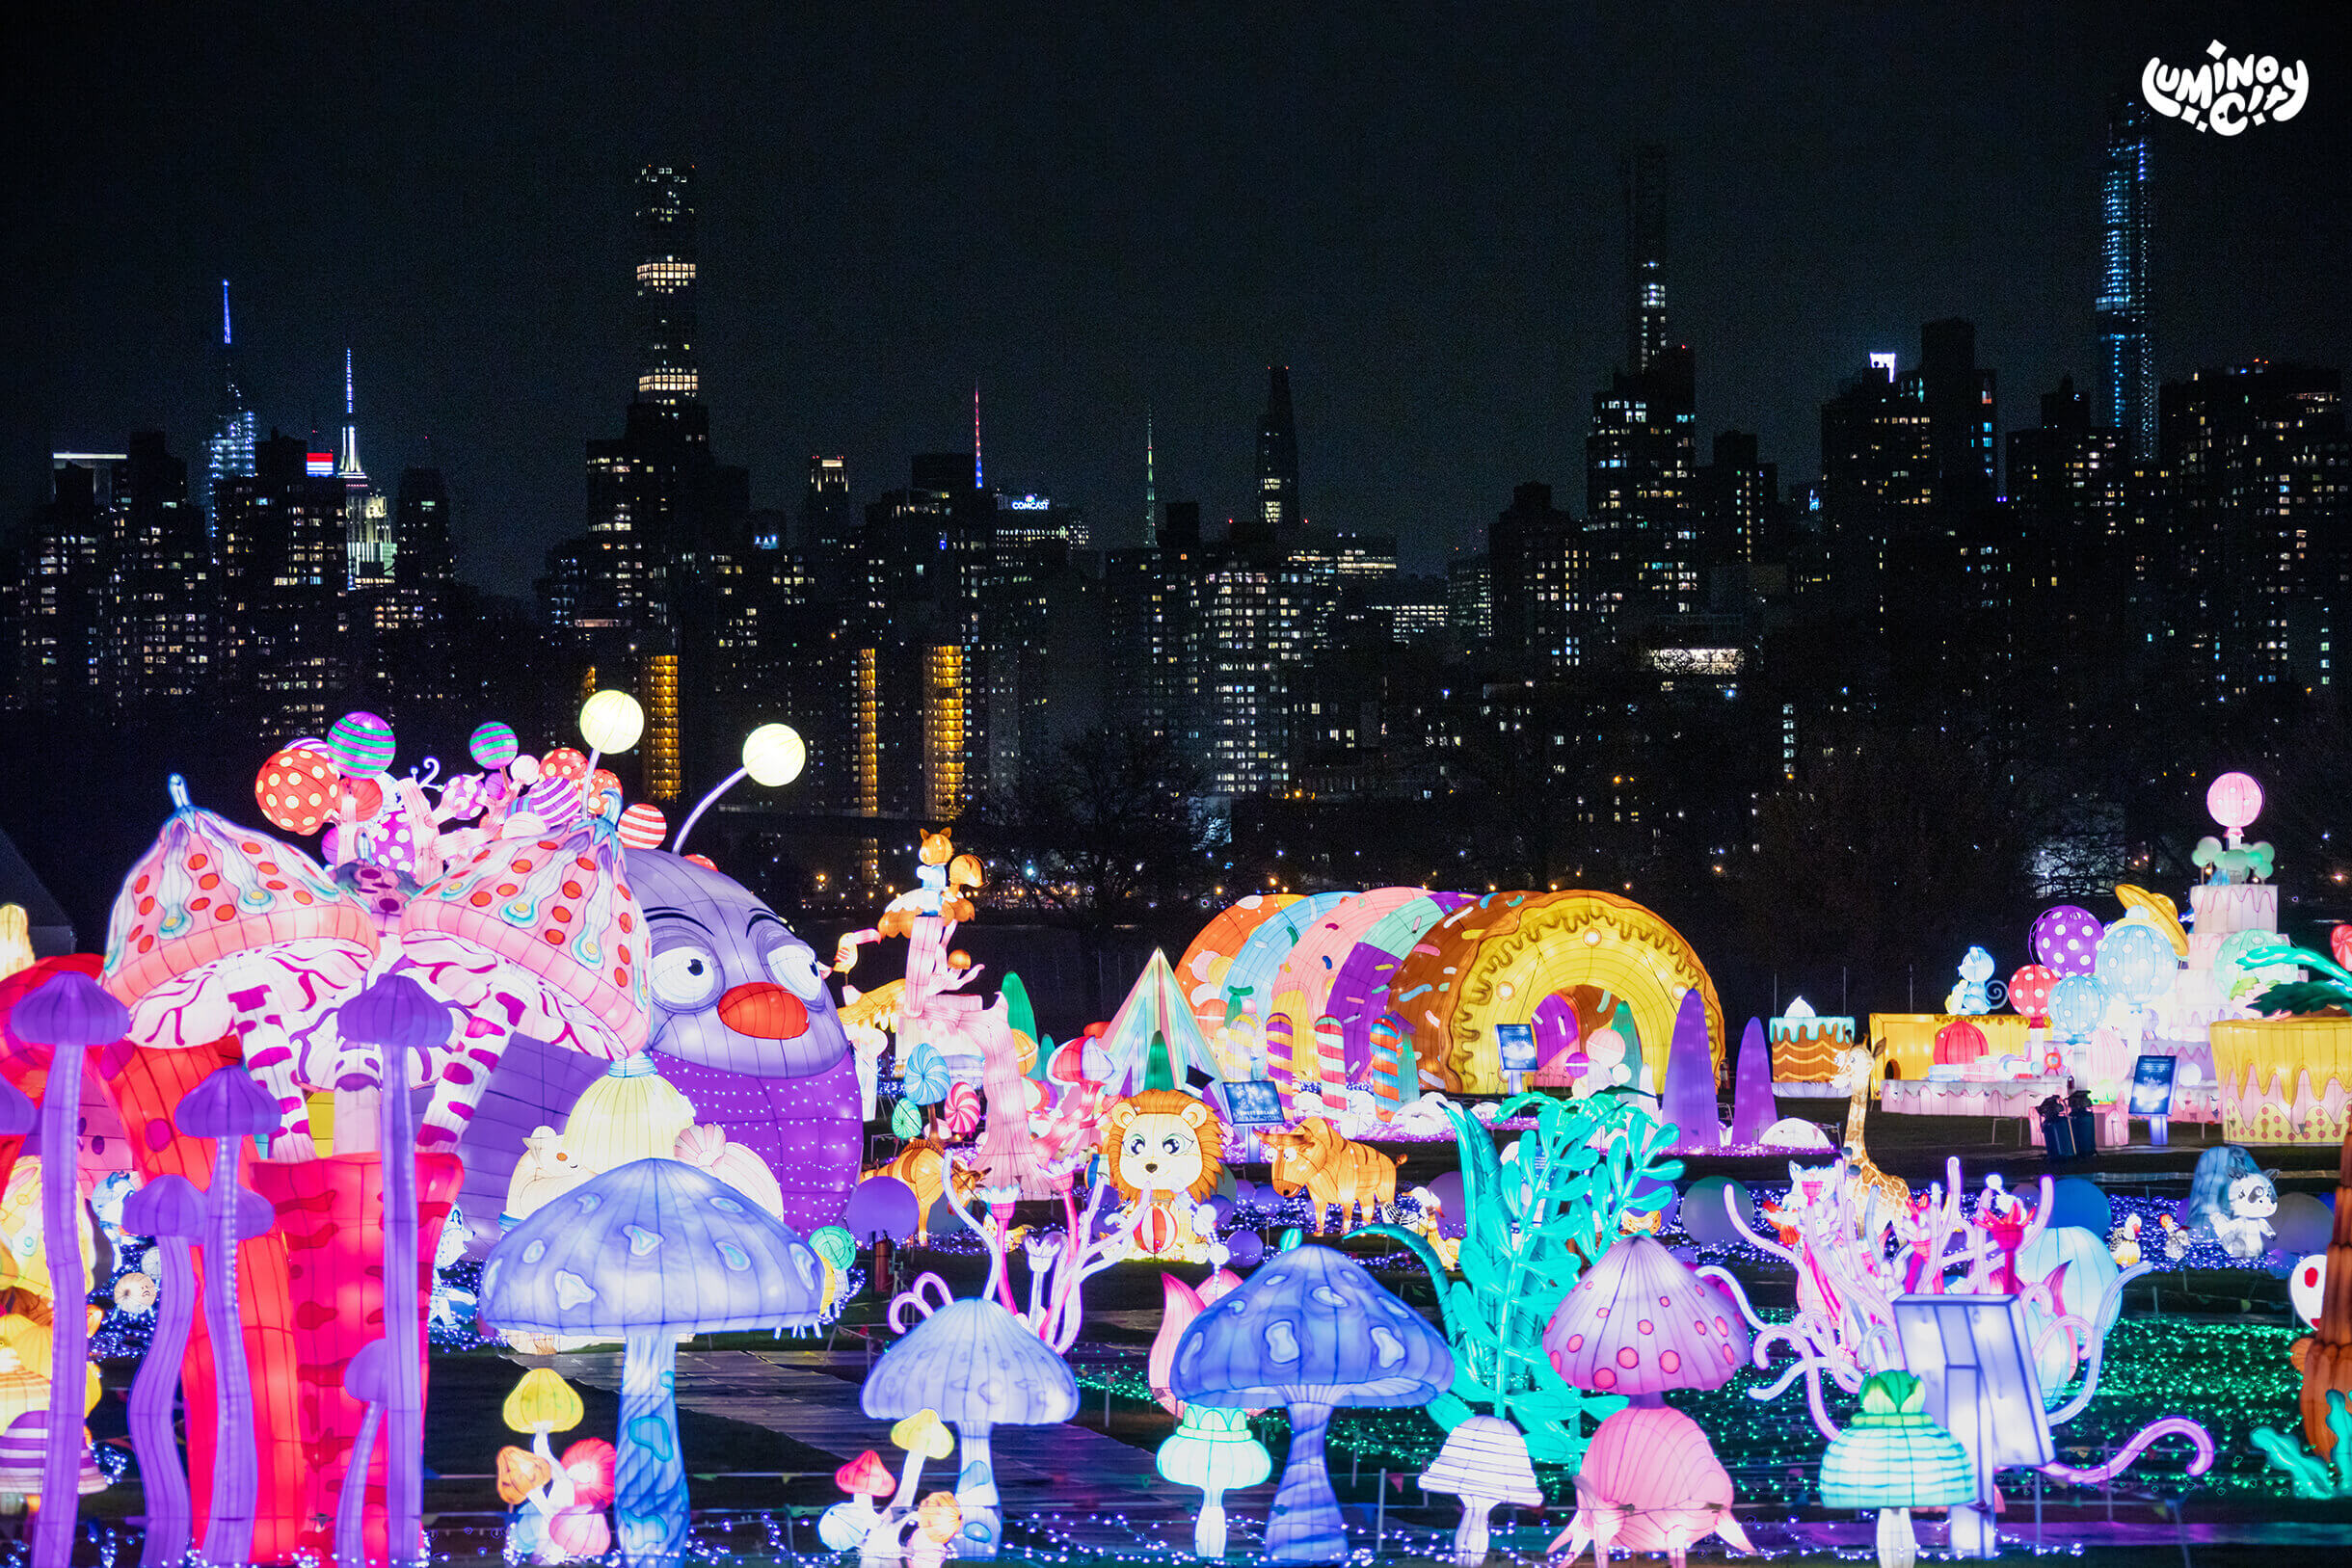 Your Guide to LuminoCity Festival at Randall’s Island Park